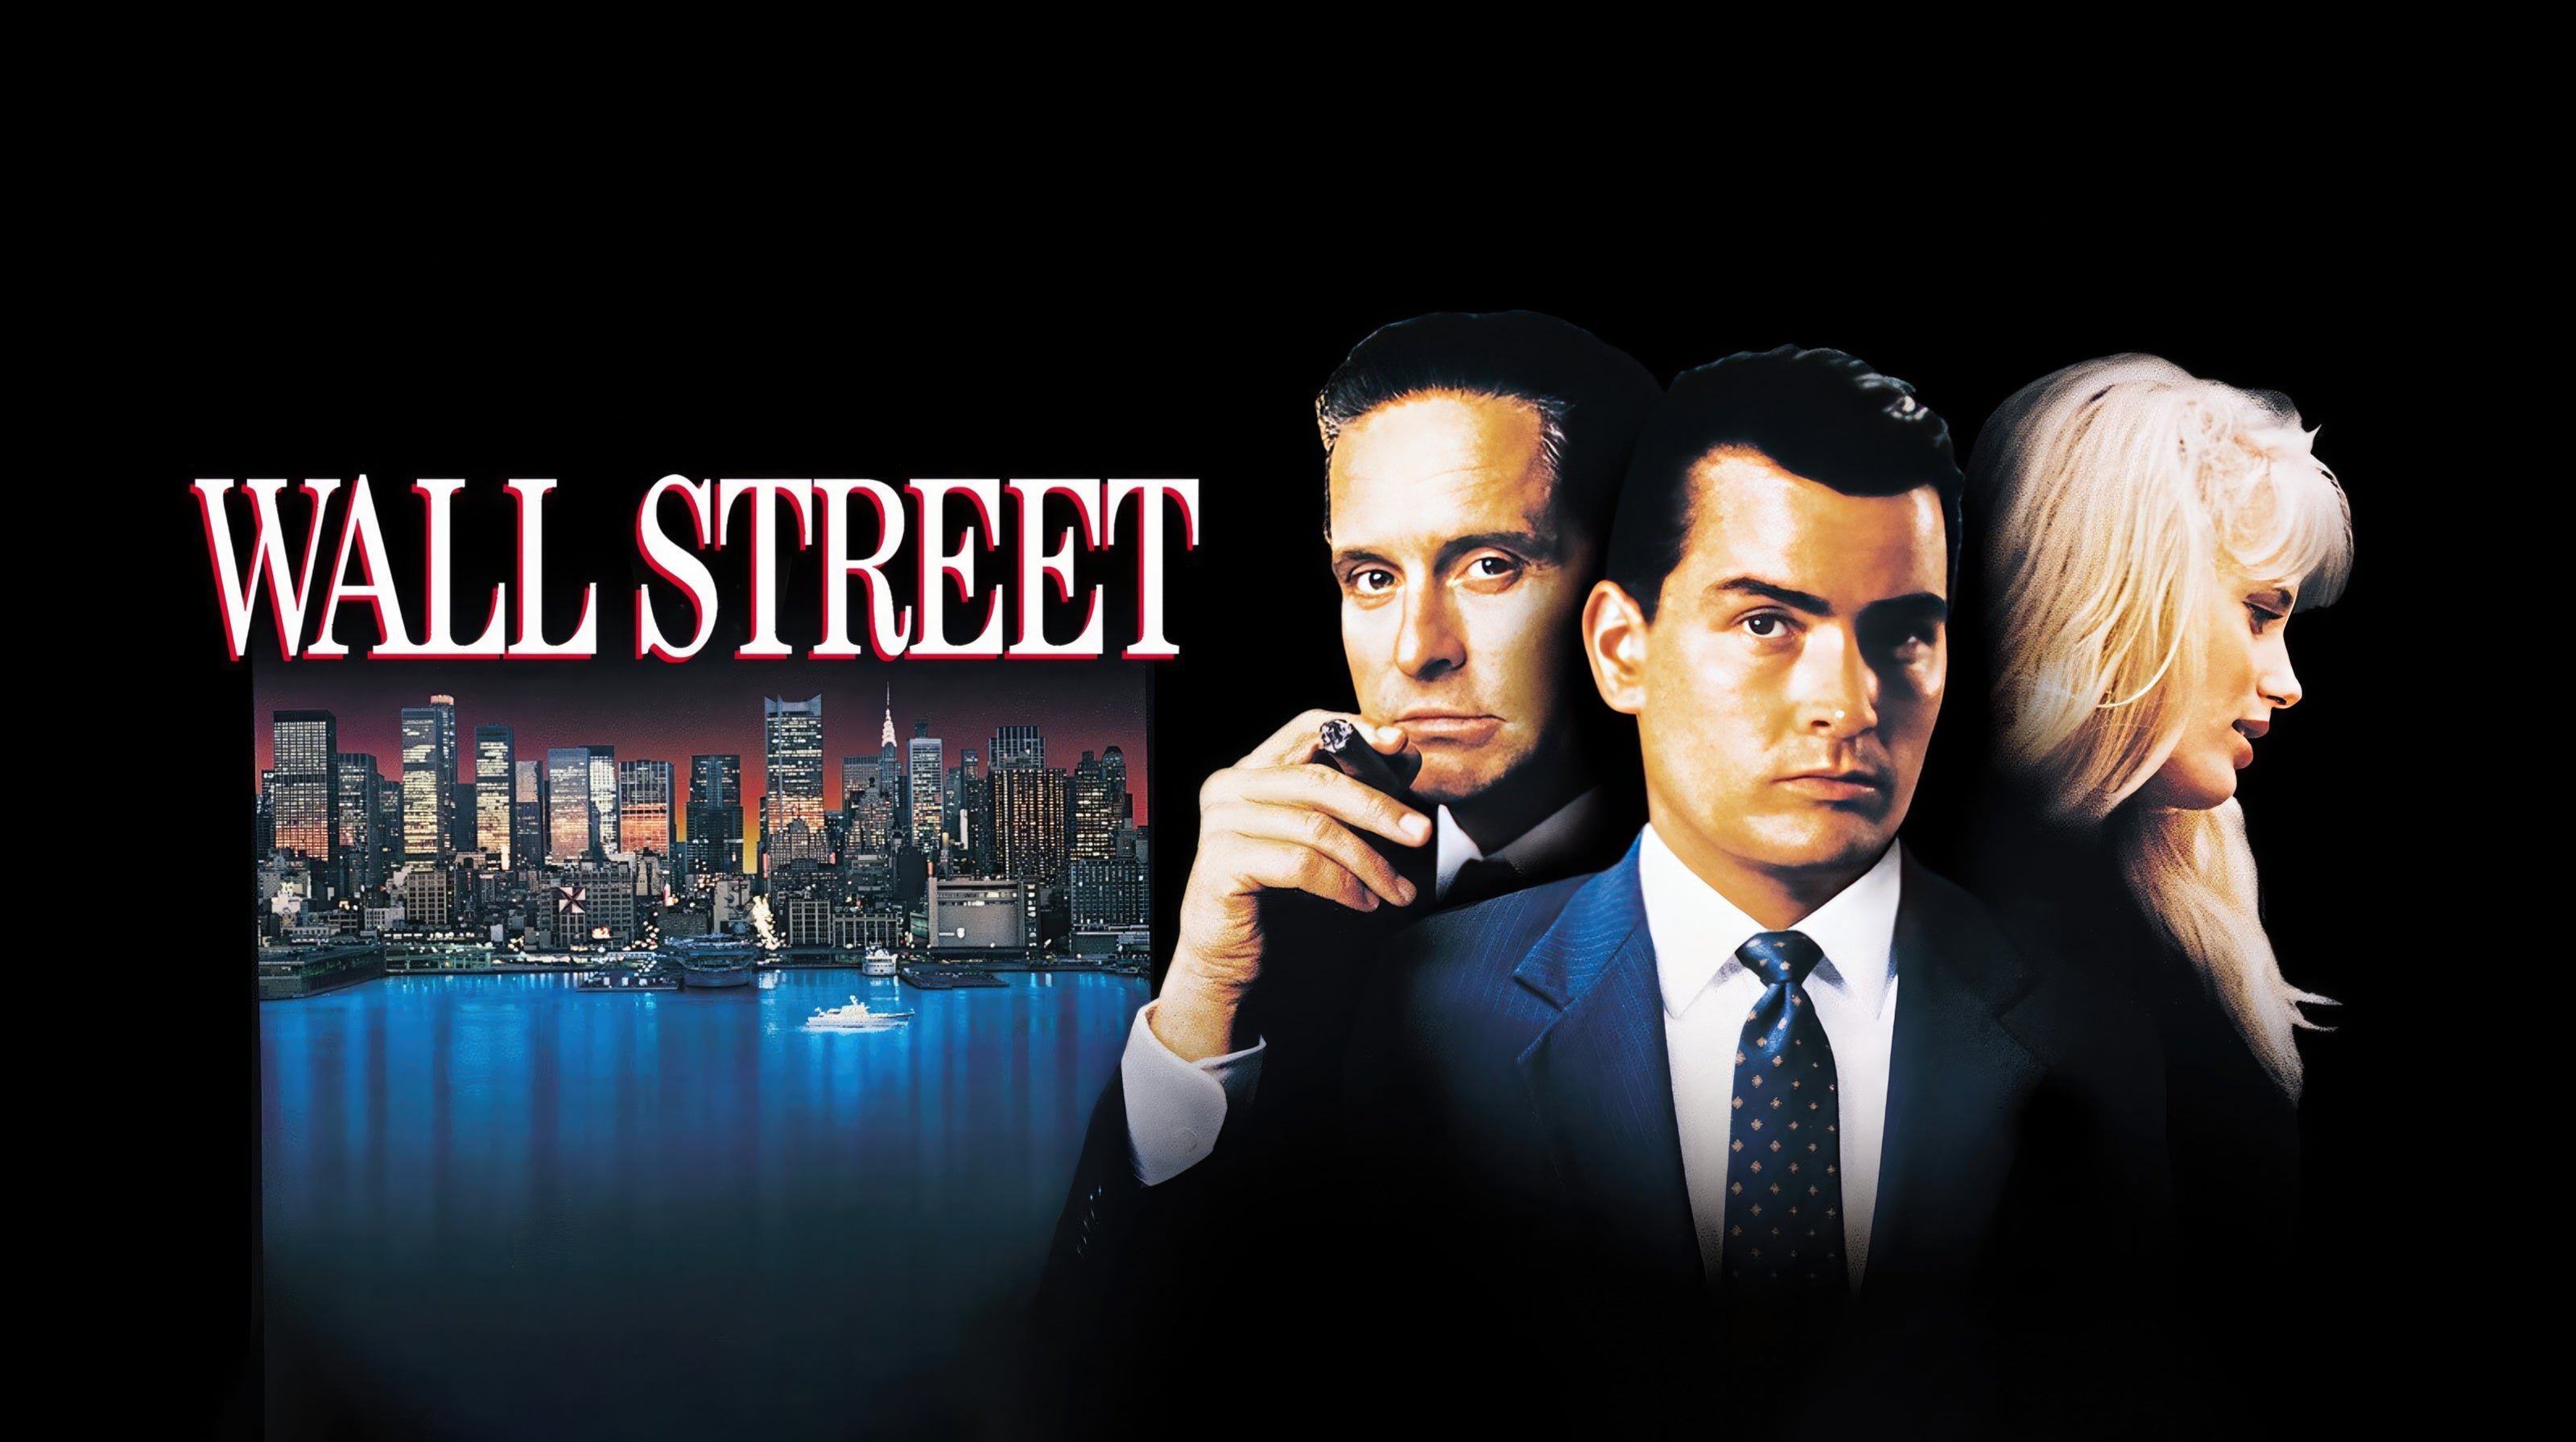 Wall Street Script Screenplay - Image of Movie Poster